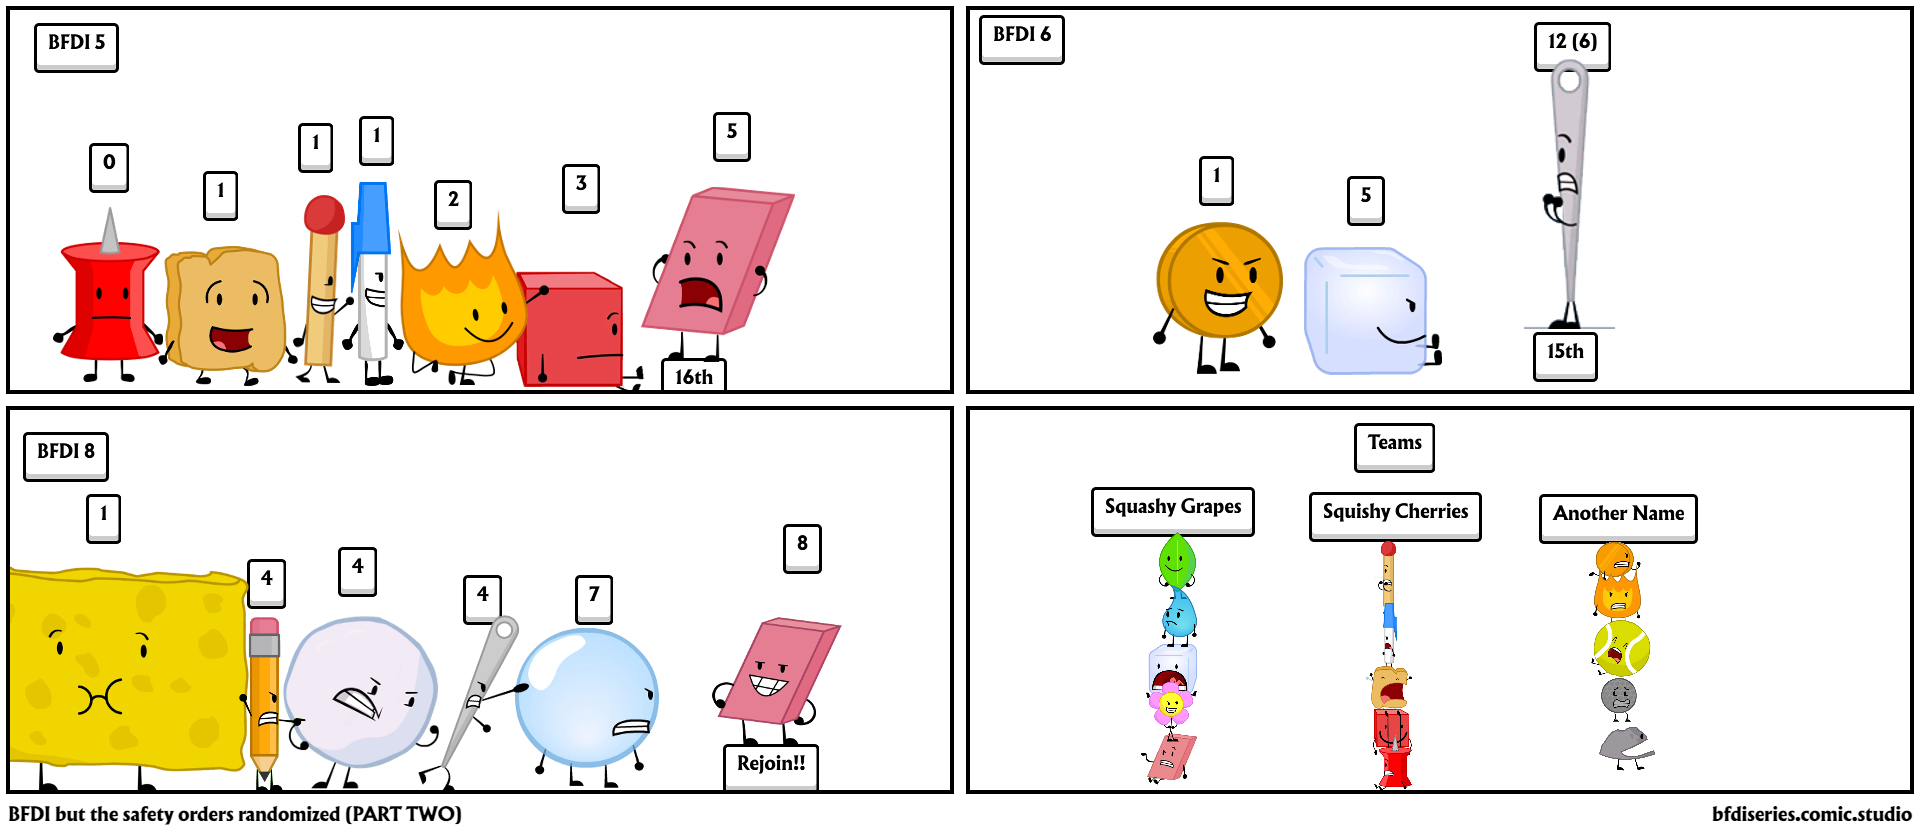 BFDI but the safety orders randomized (PART TWO)